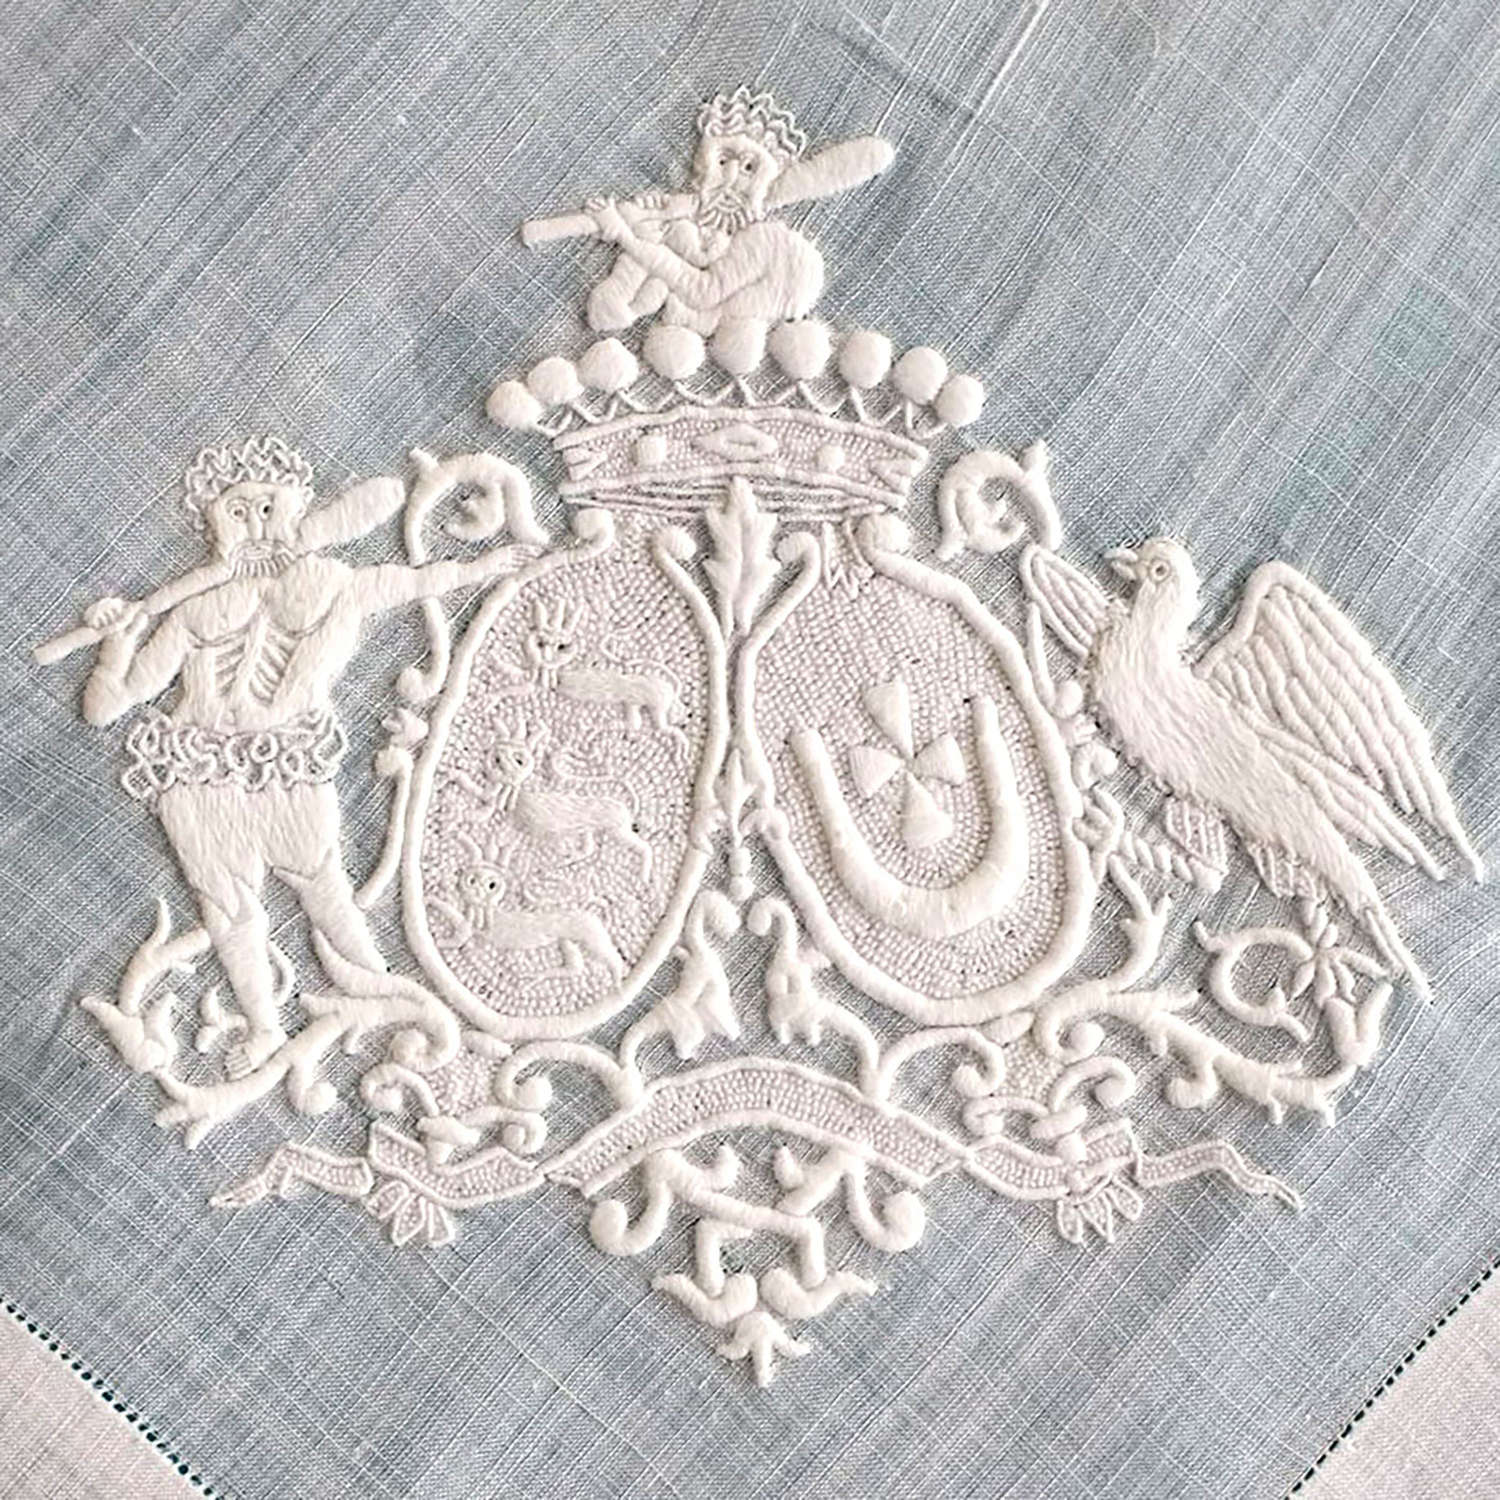 Antique French 19th Century Handkerchief with Crest and Wild Men